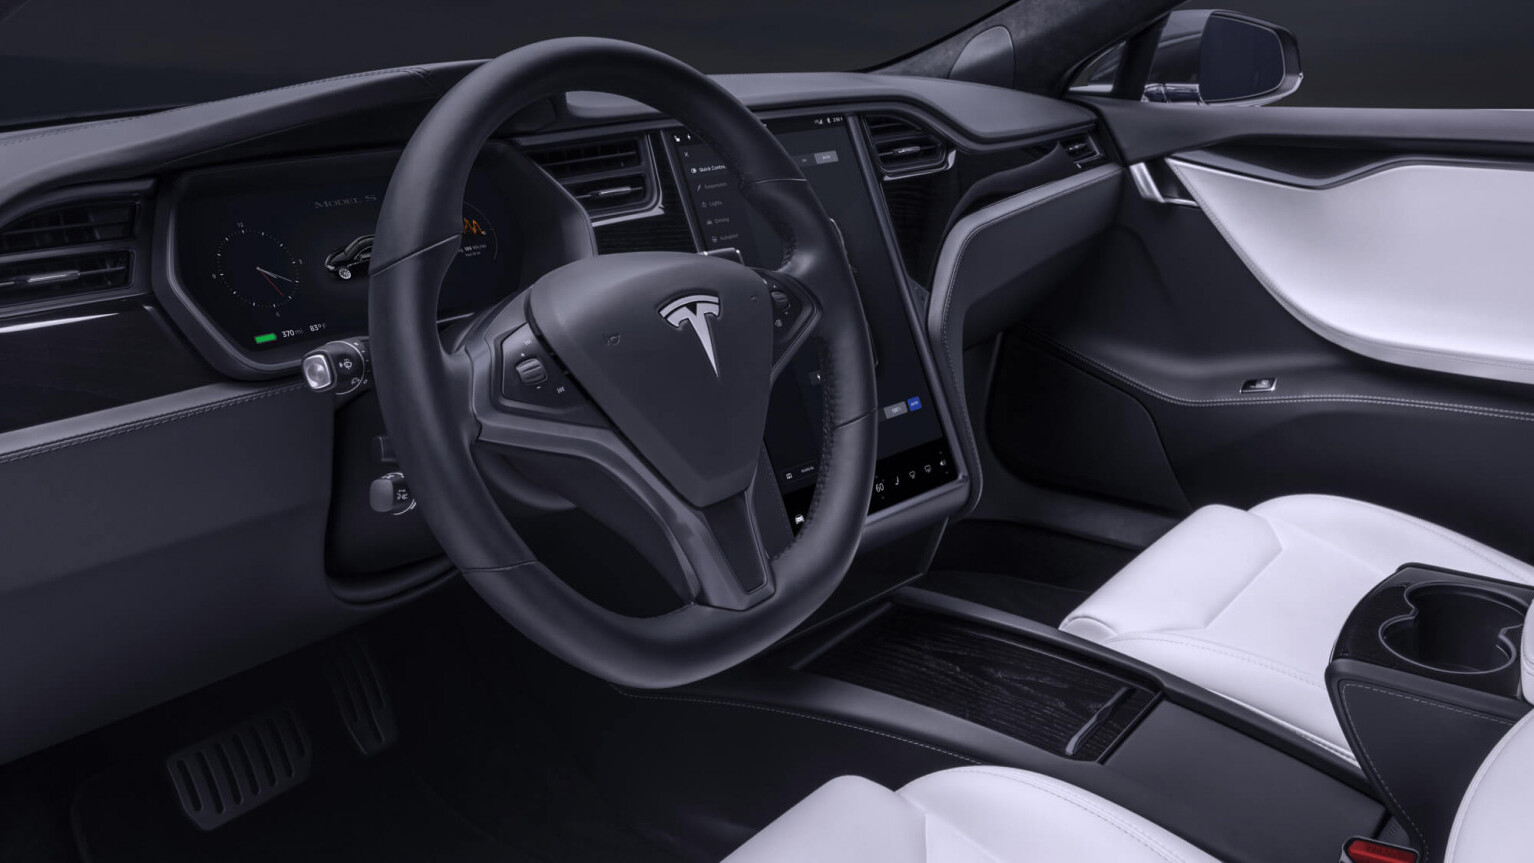 Elon Musk: Tesla’s full self-driving mode could arrive before the year’s end